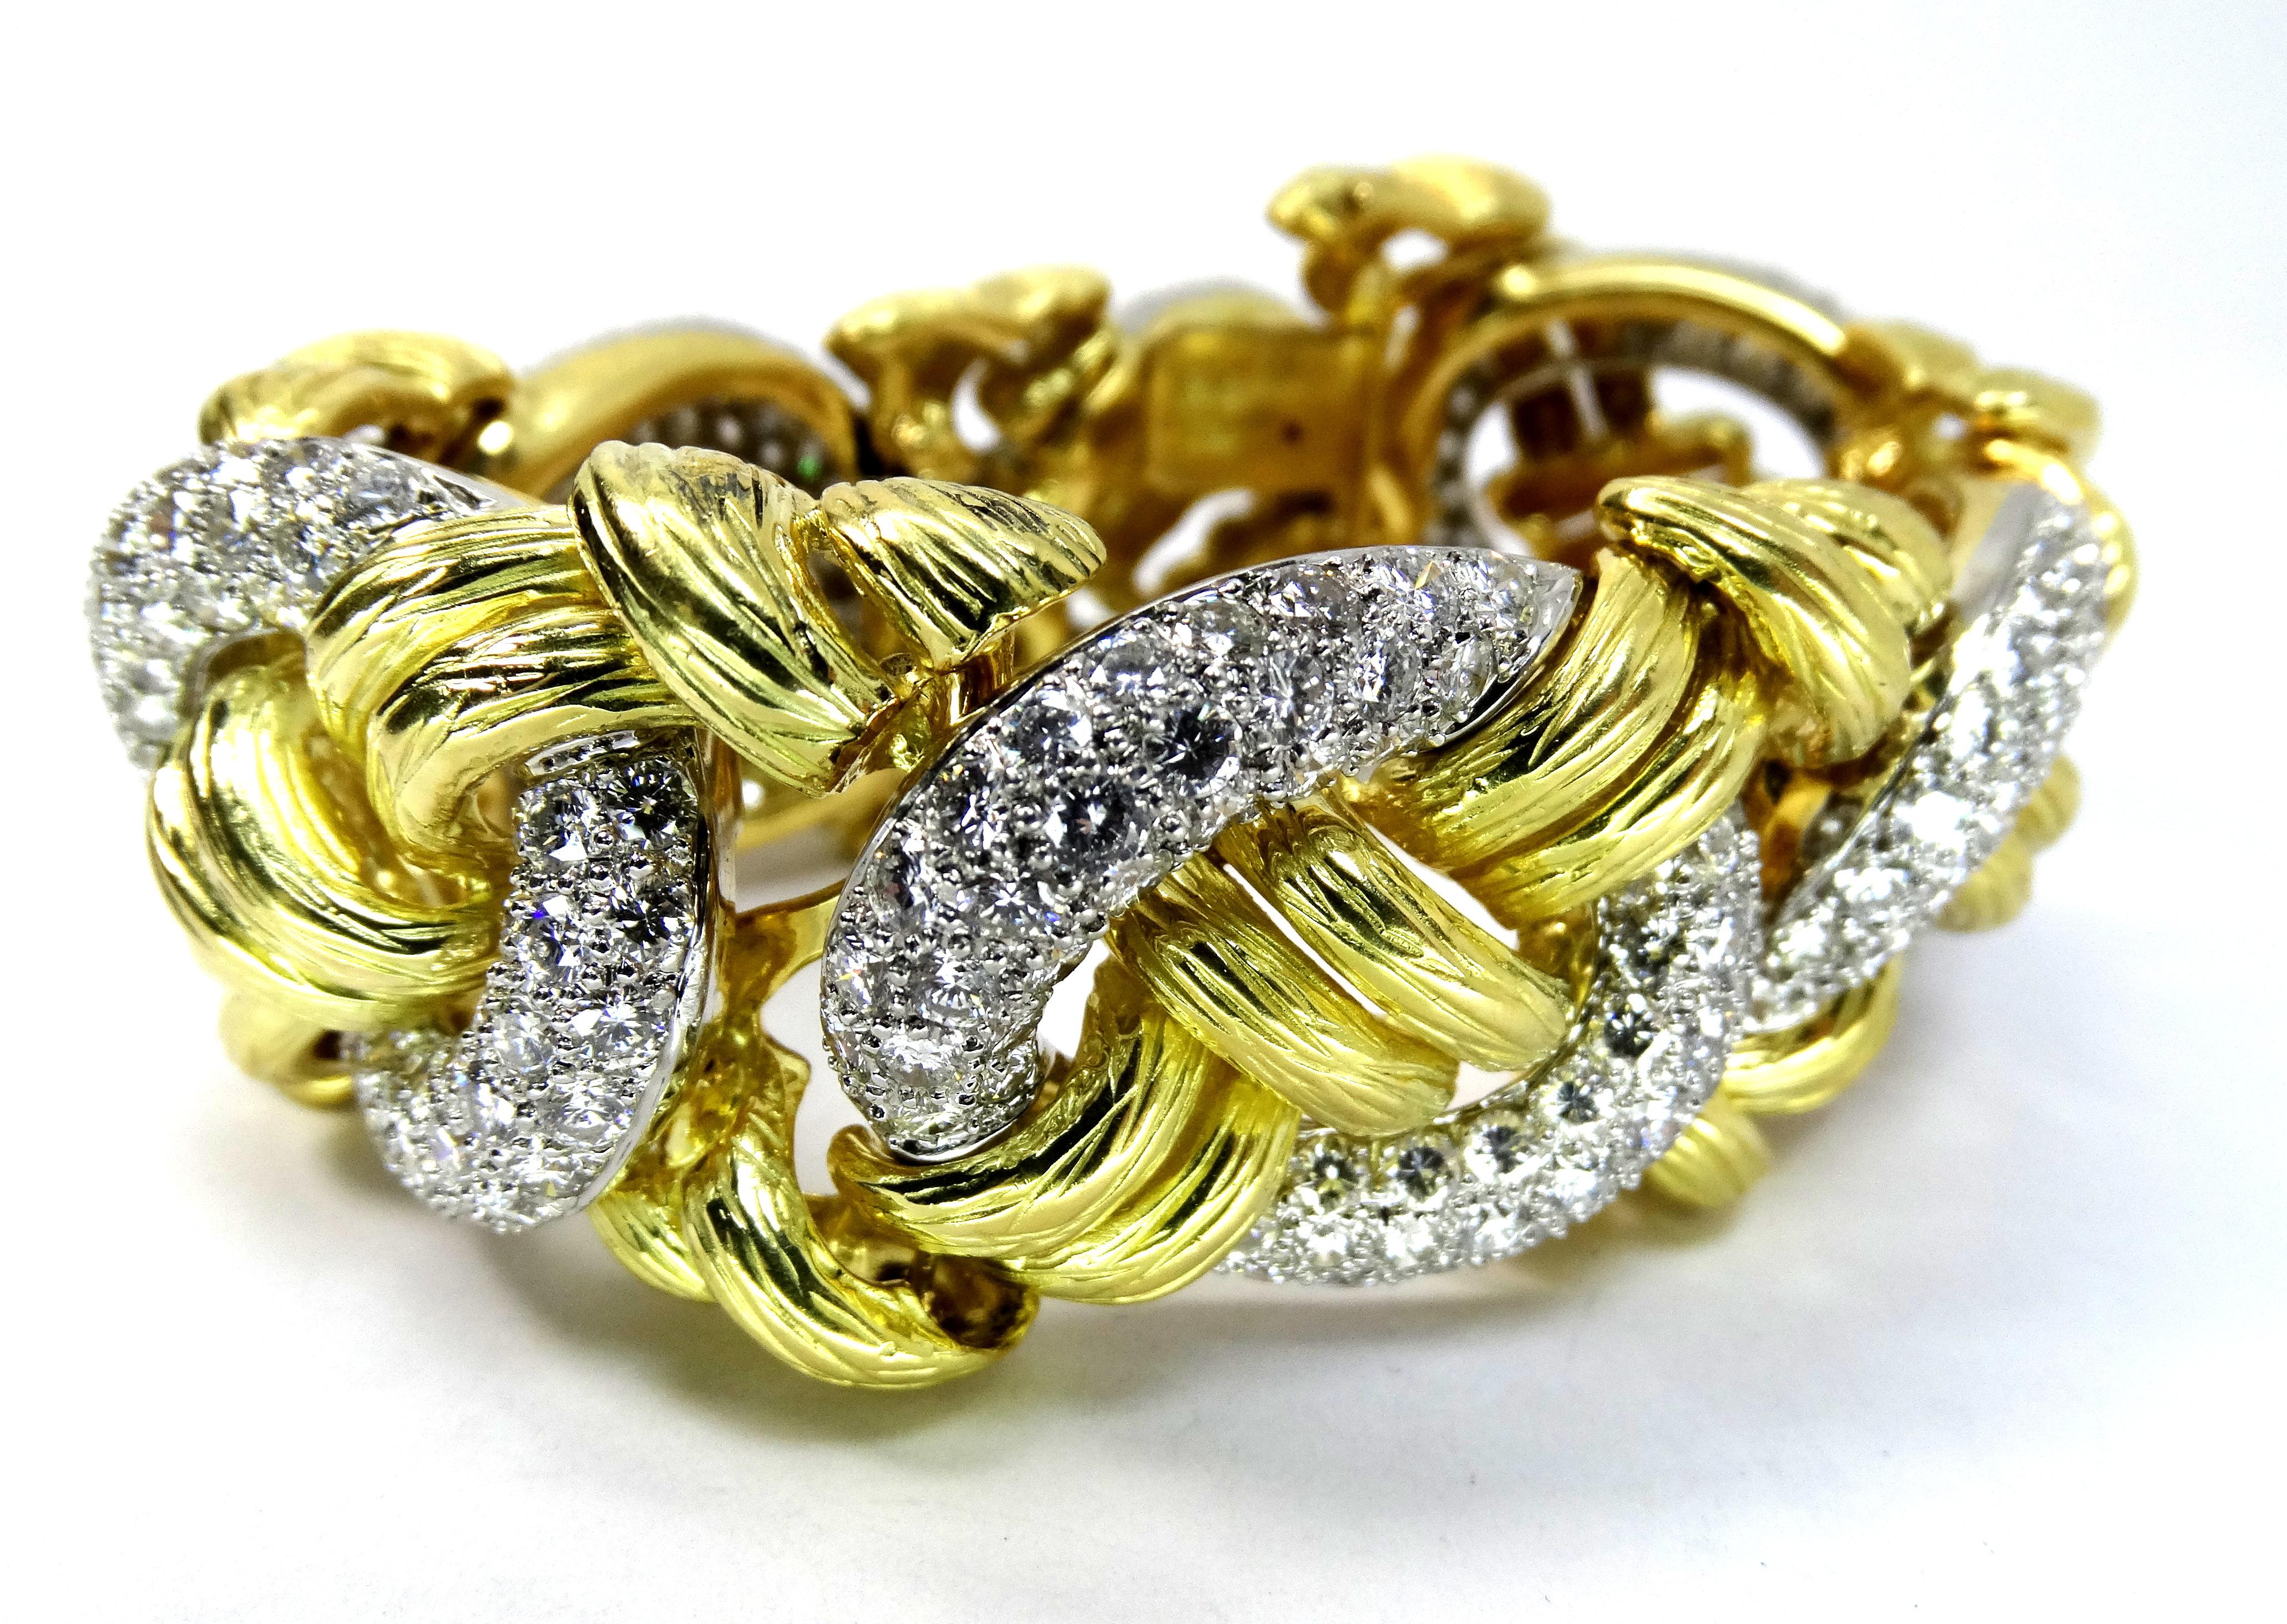 Hammerman Jewels Bracelet made with 750 18k Yellow Gold, 950 Platinum and 22 cts of diamonds. 174.4 grams. 